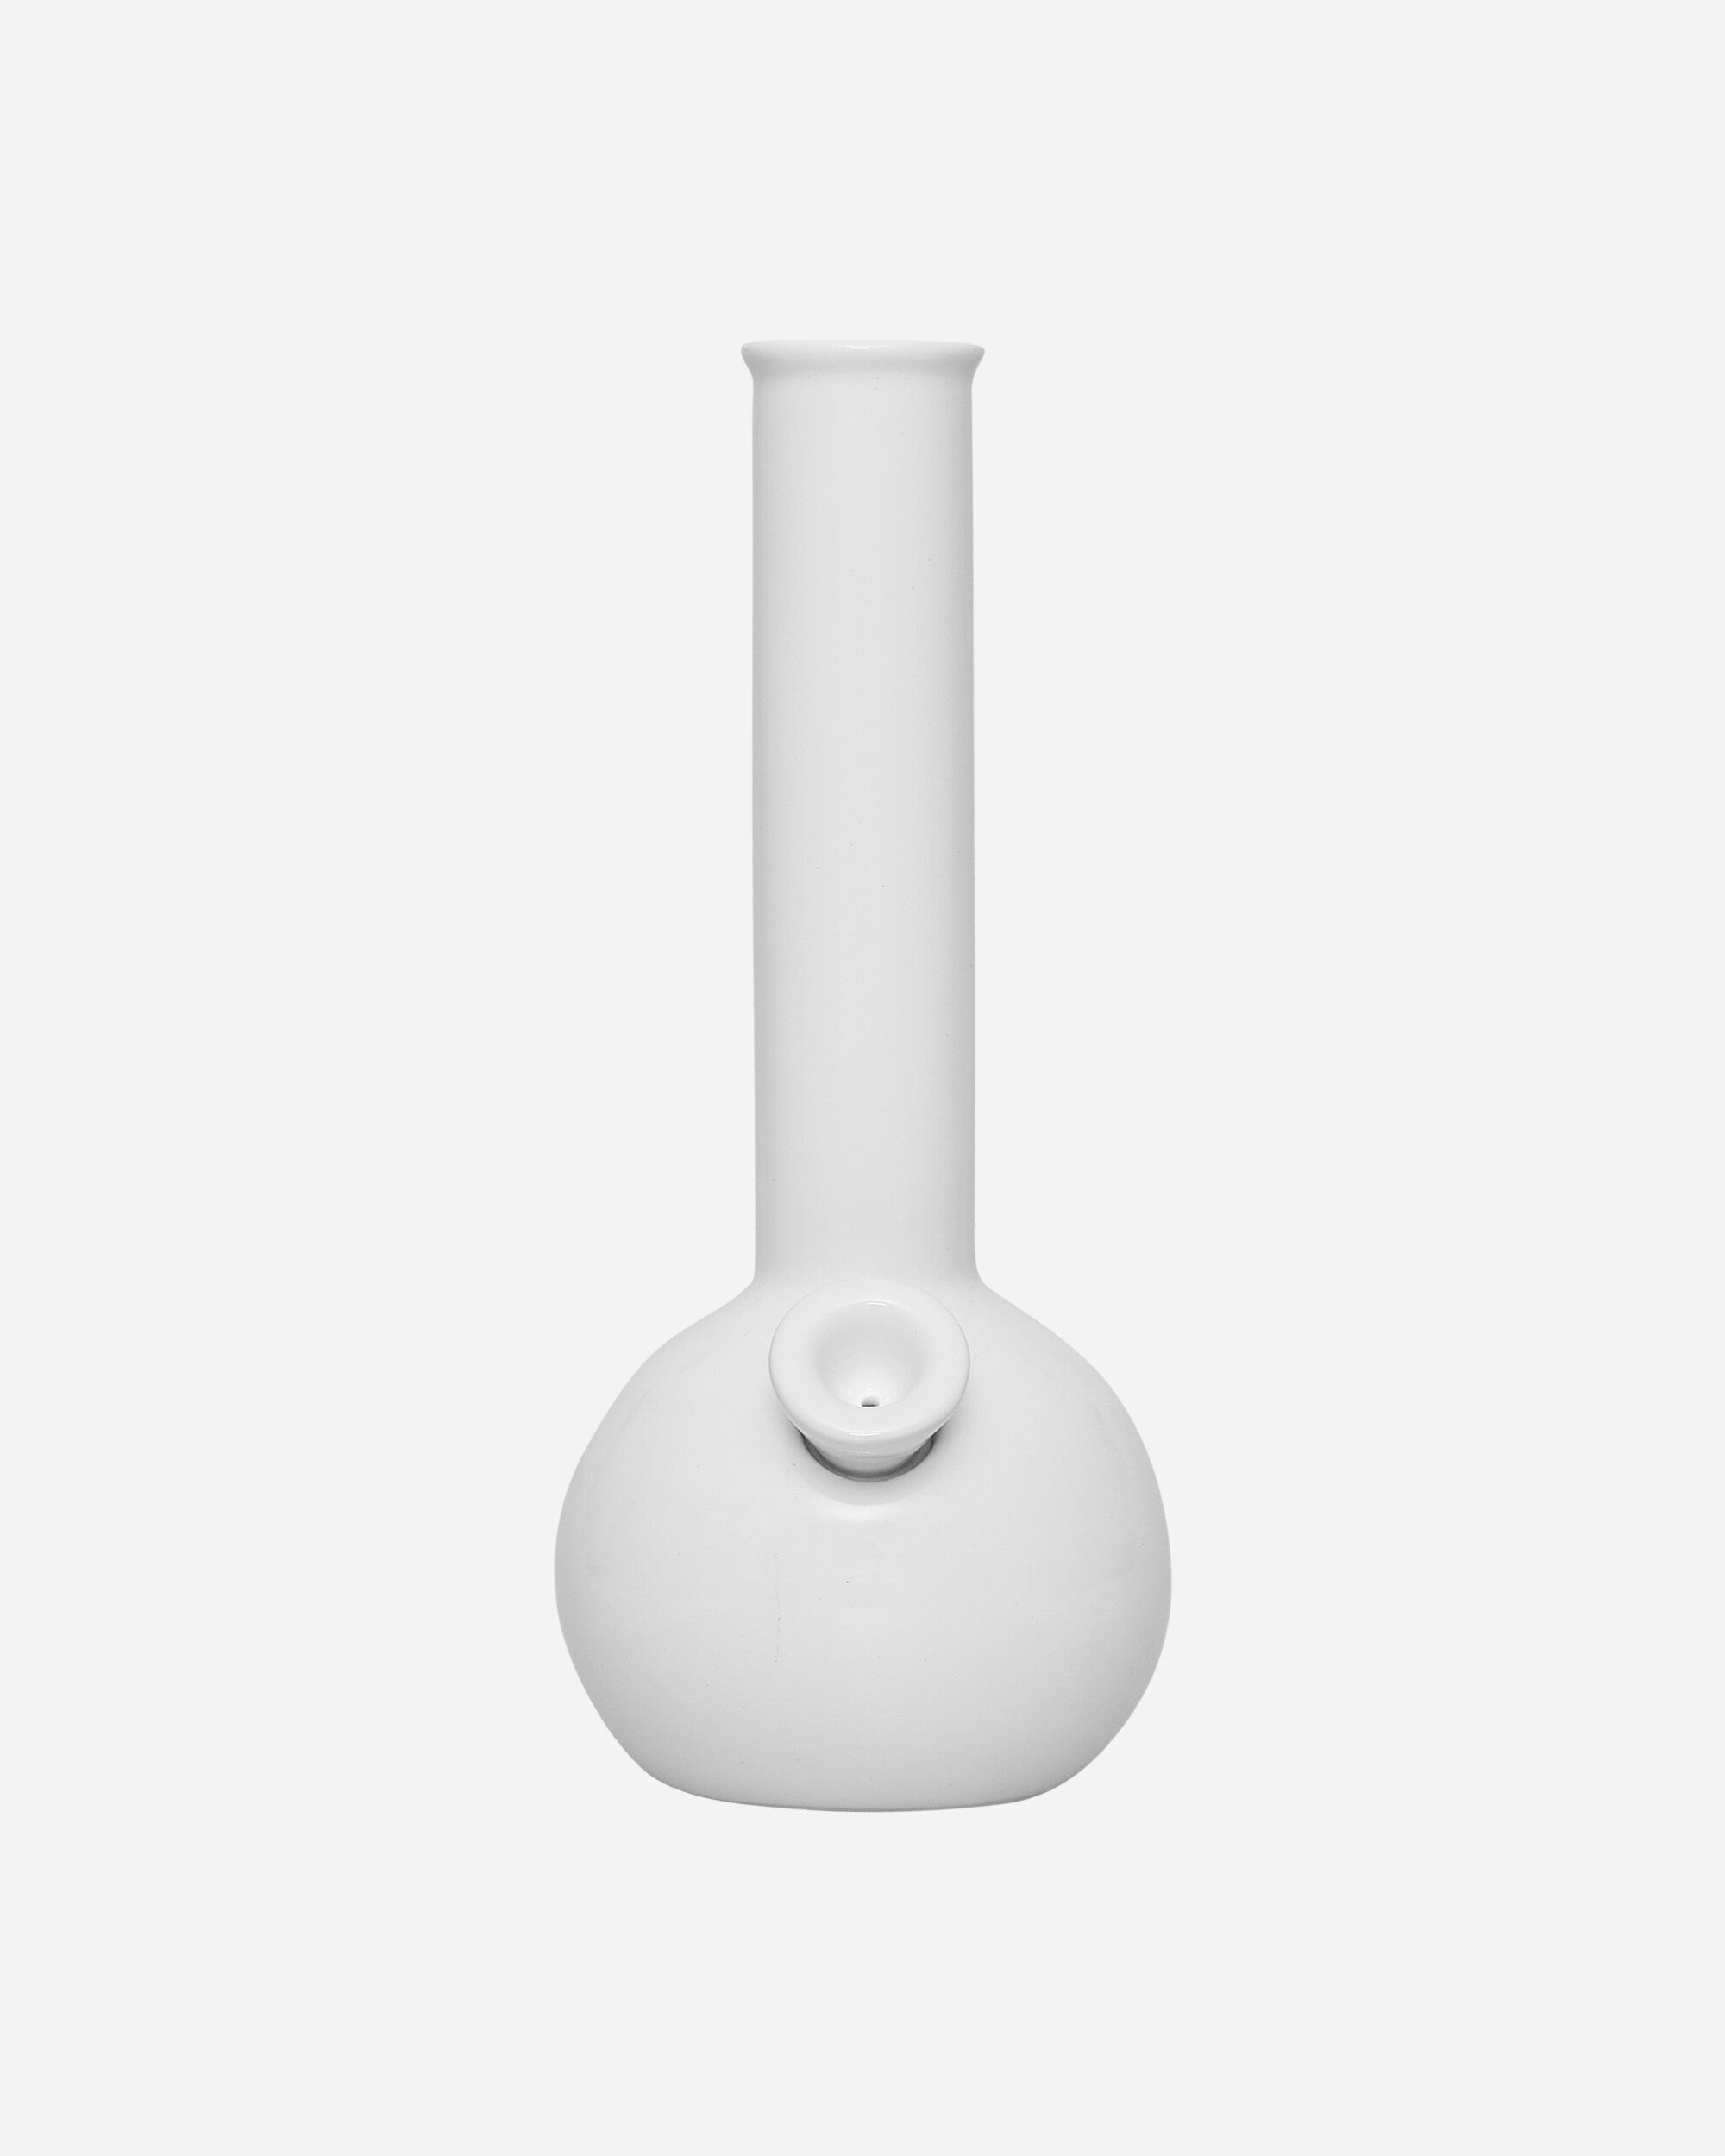 Summerland Ceramics Chongo White High Times Bongs and Pipes CHW 1